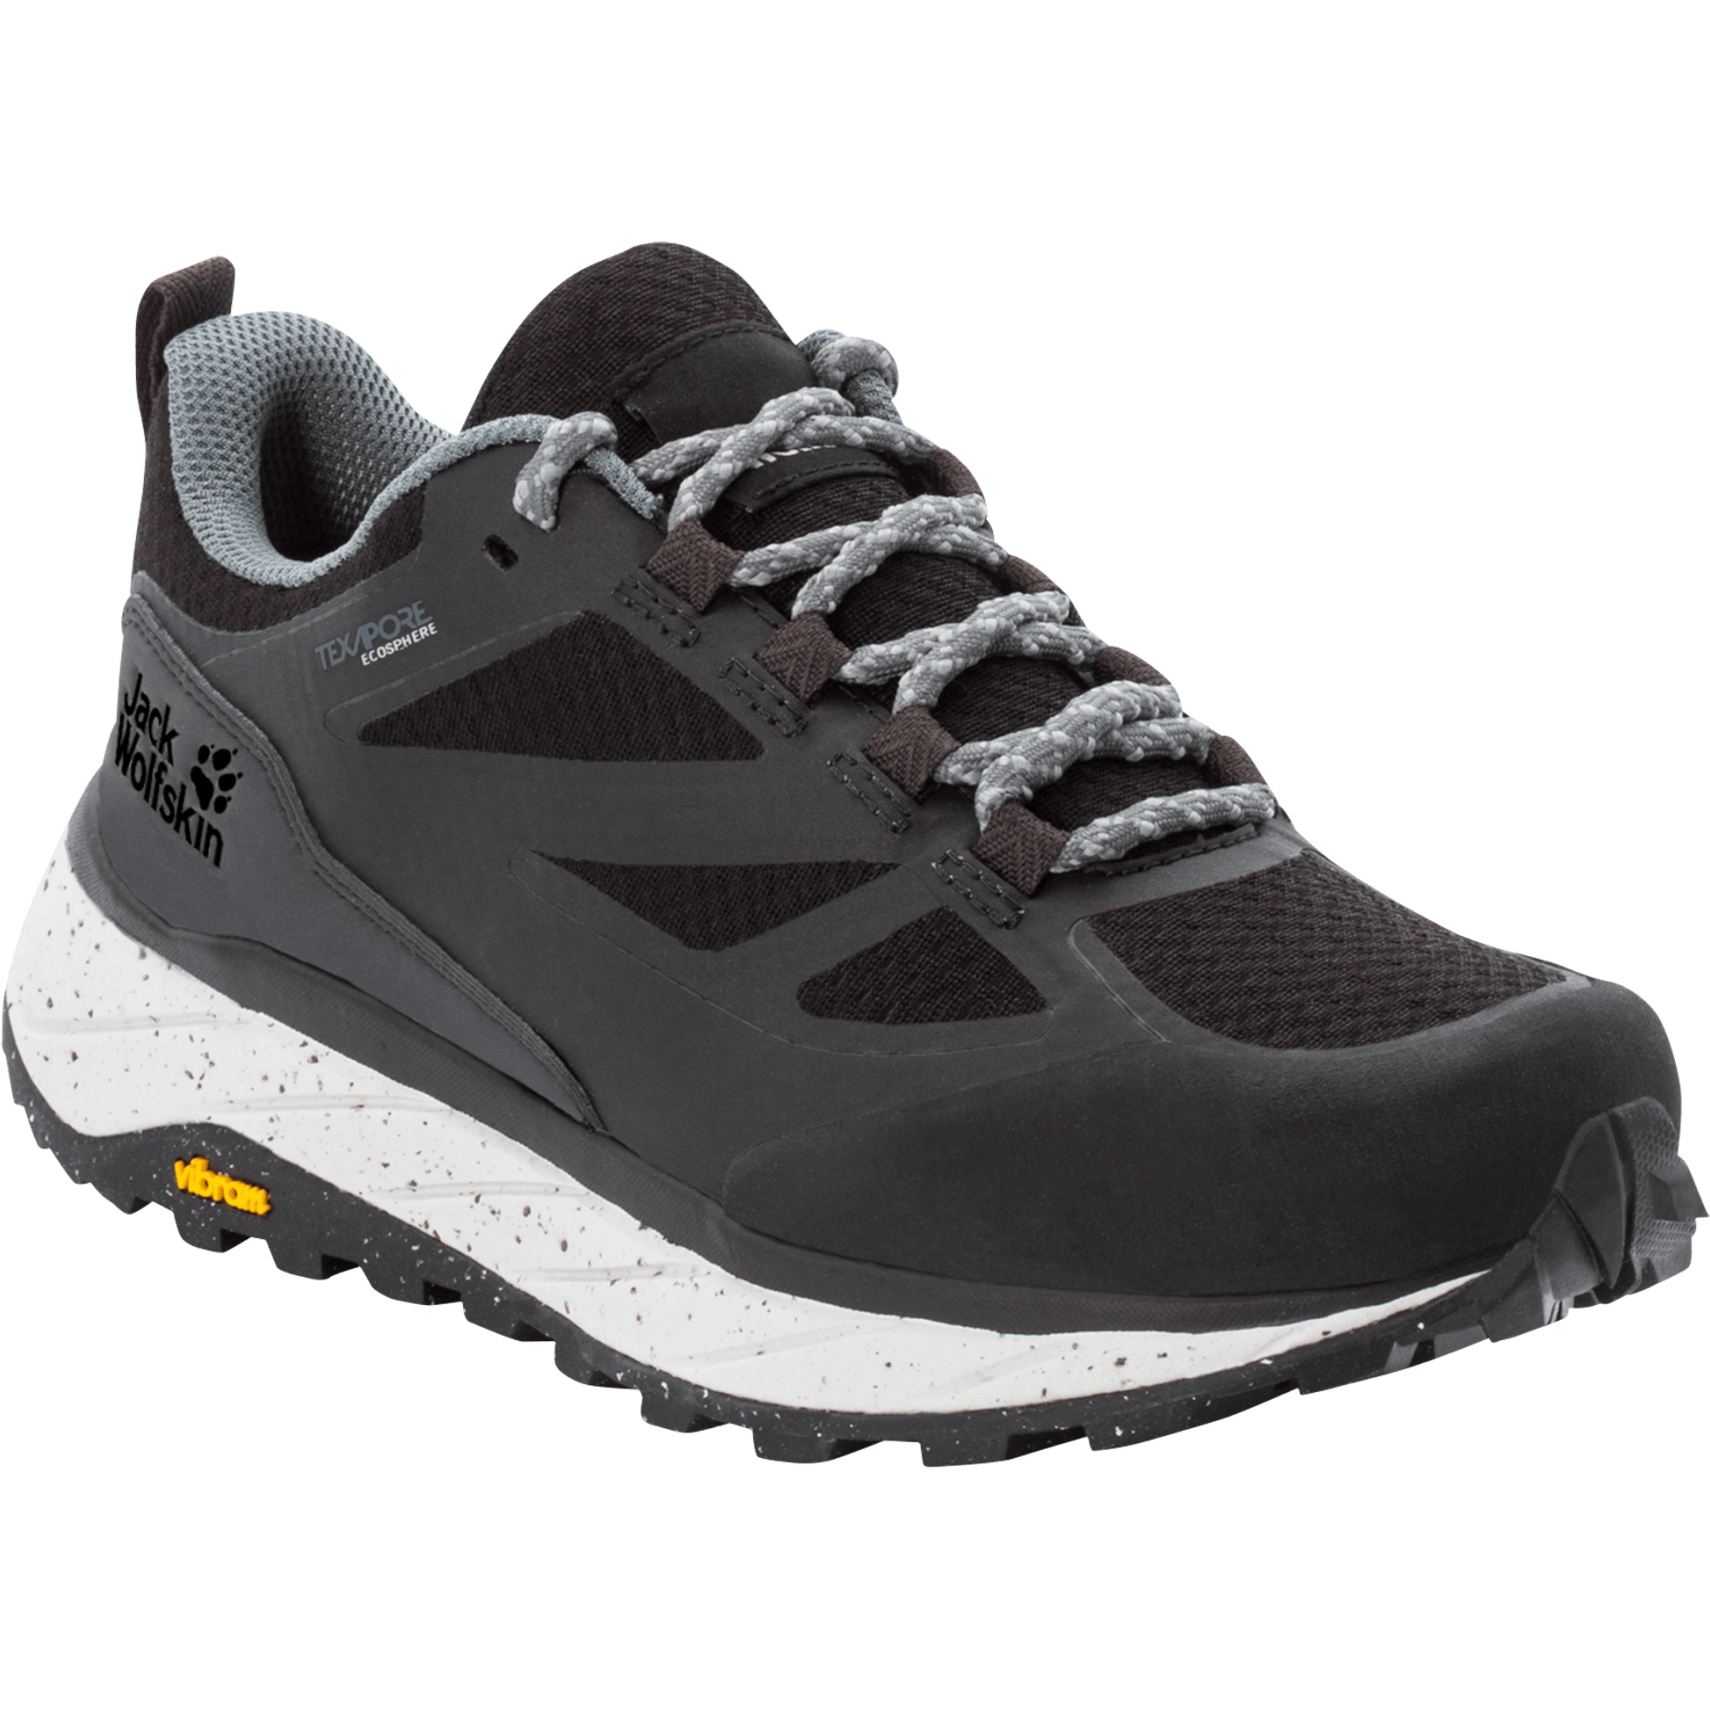 Picture of Jack Wolfskin Terraventure Texapore Low Hiking Shoes Women - phantom / grey